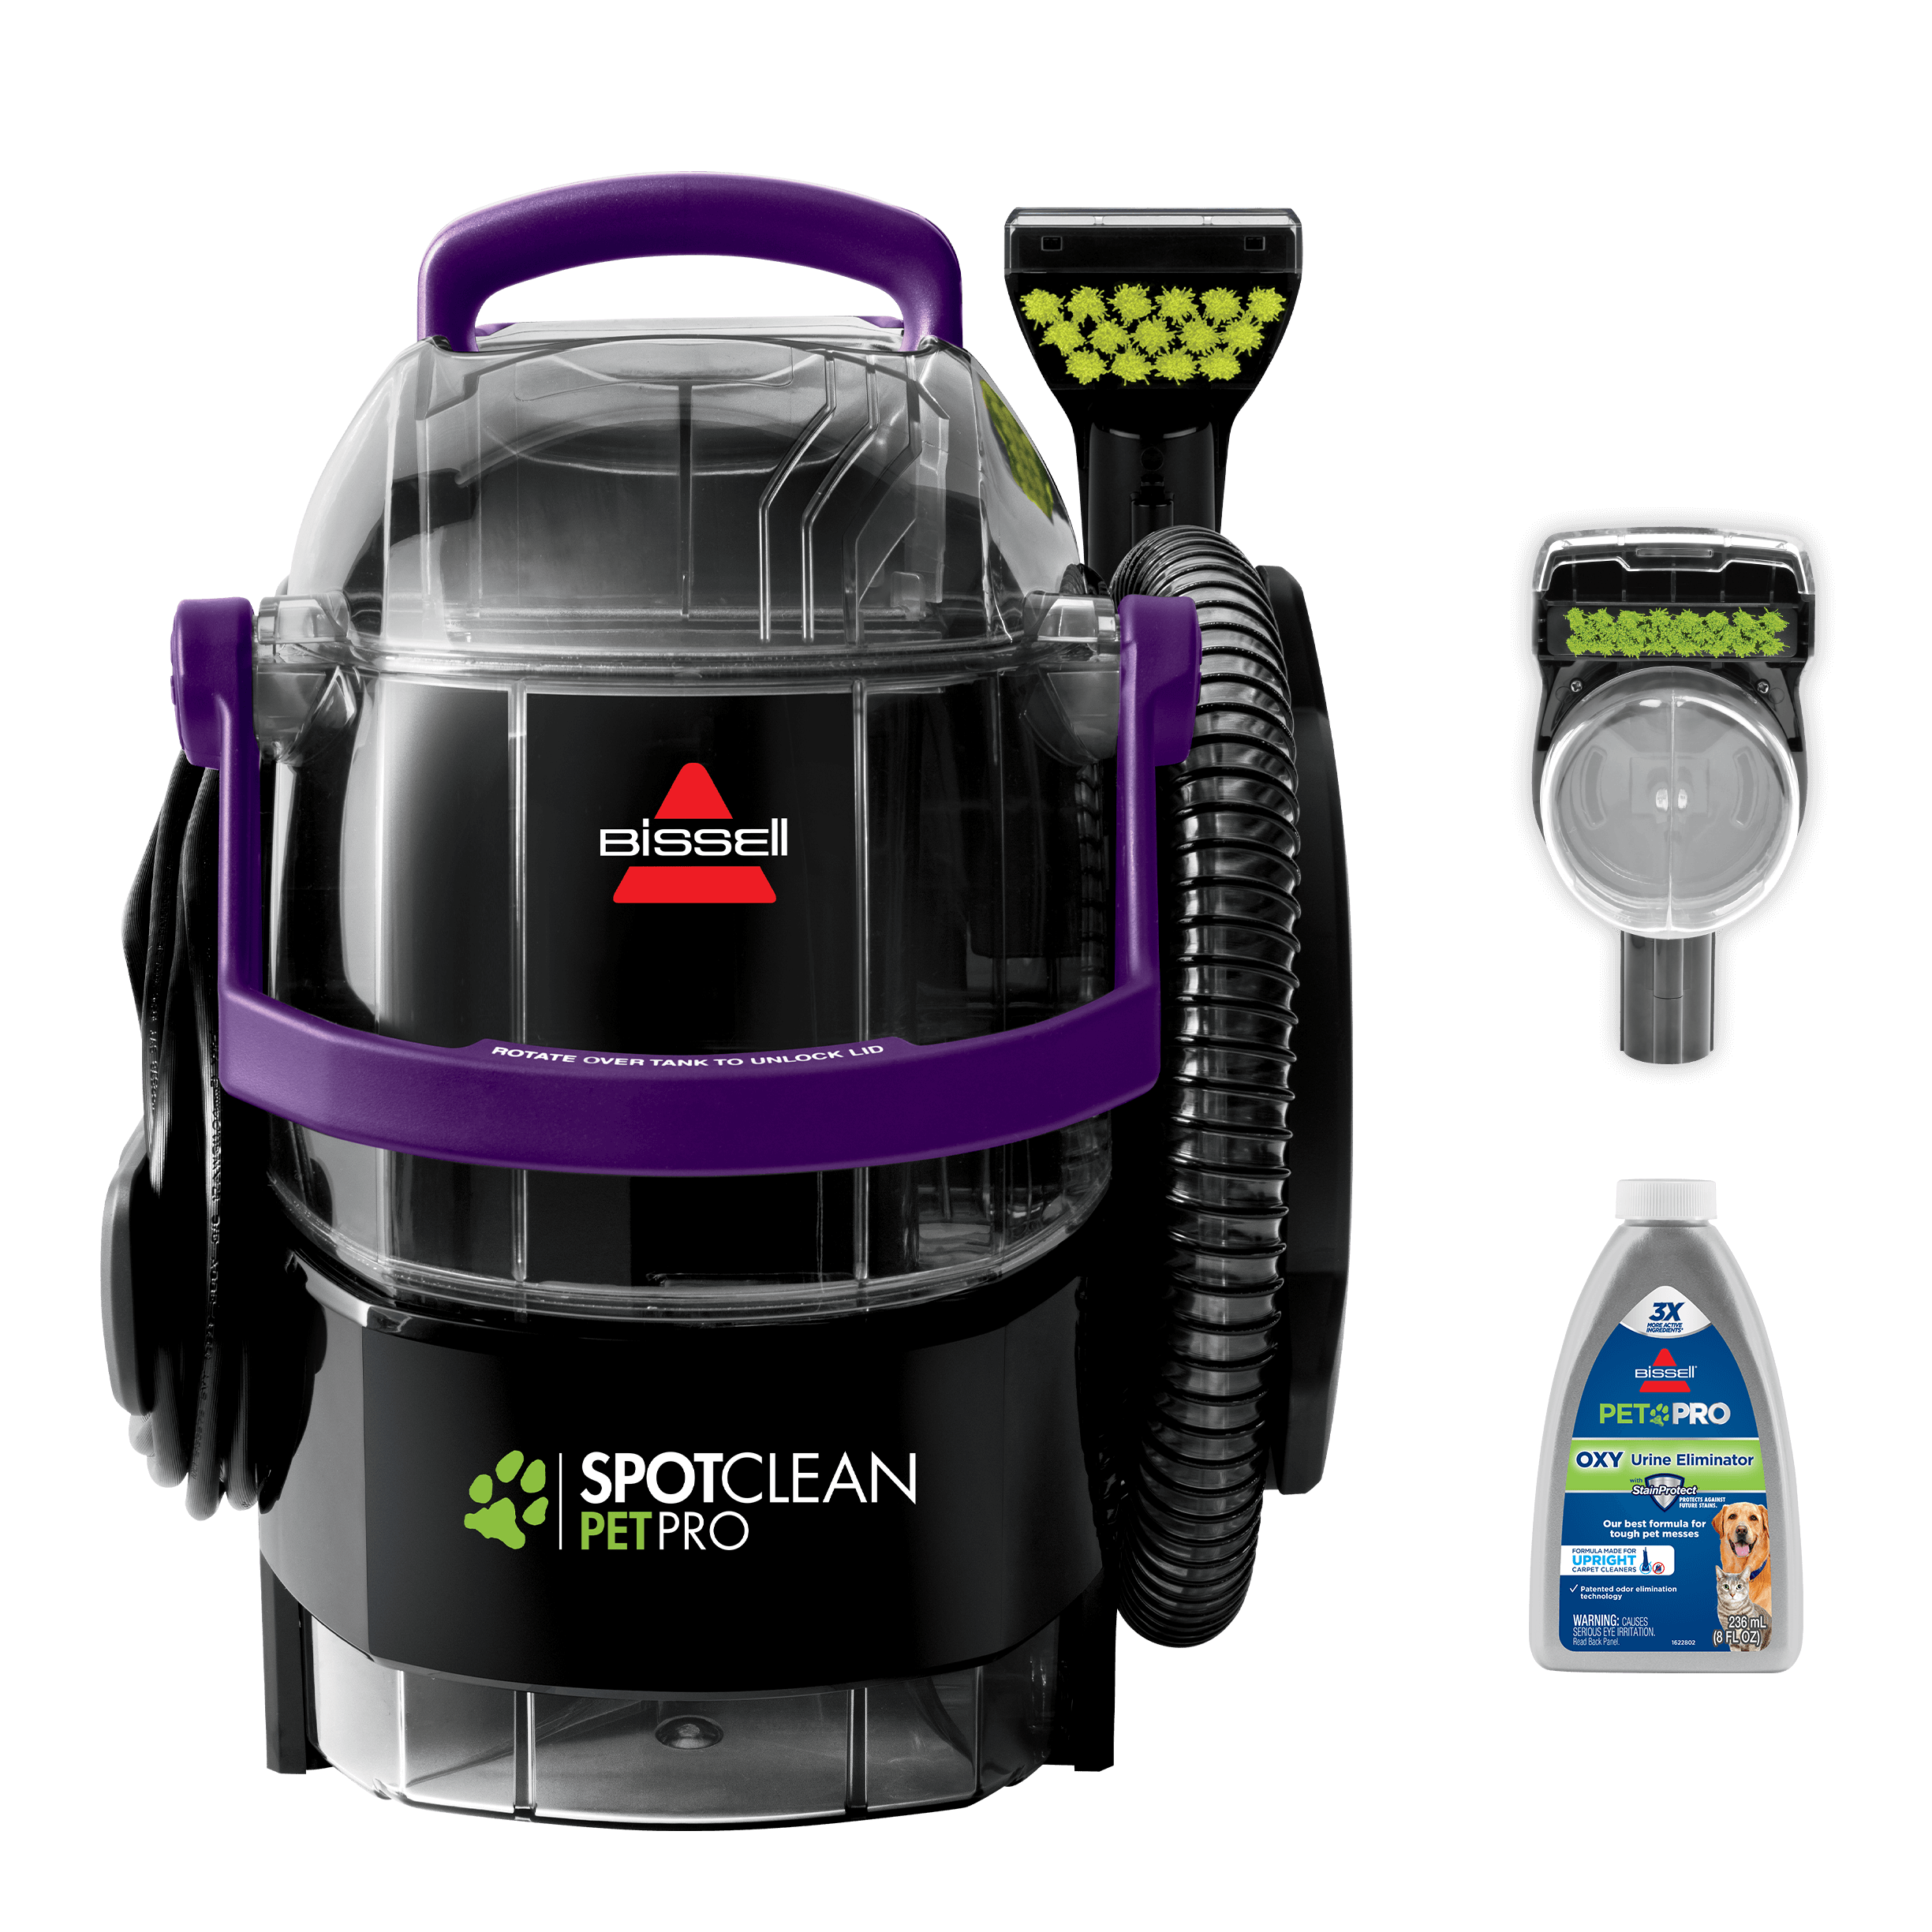 BISSELL SpotClean, Quickly Removes Stains Carpets, Rugs, and Upholstery